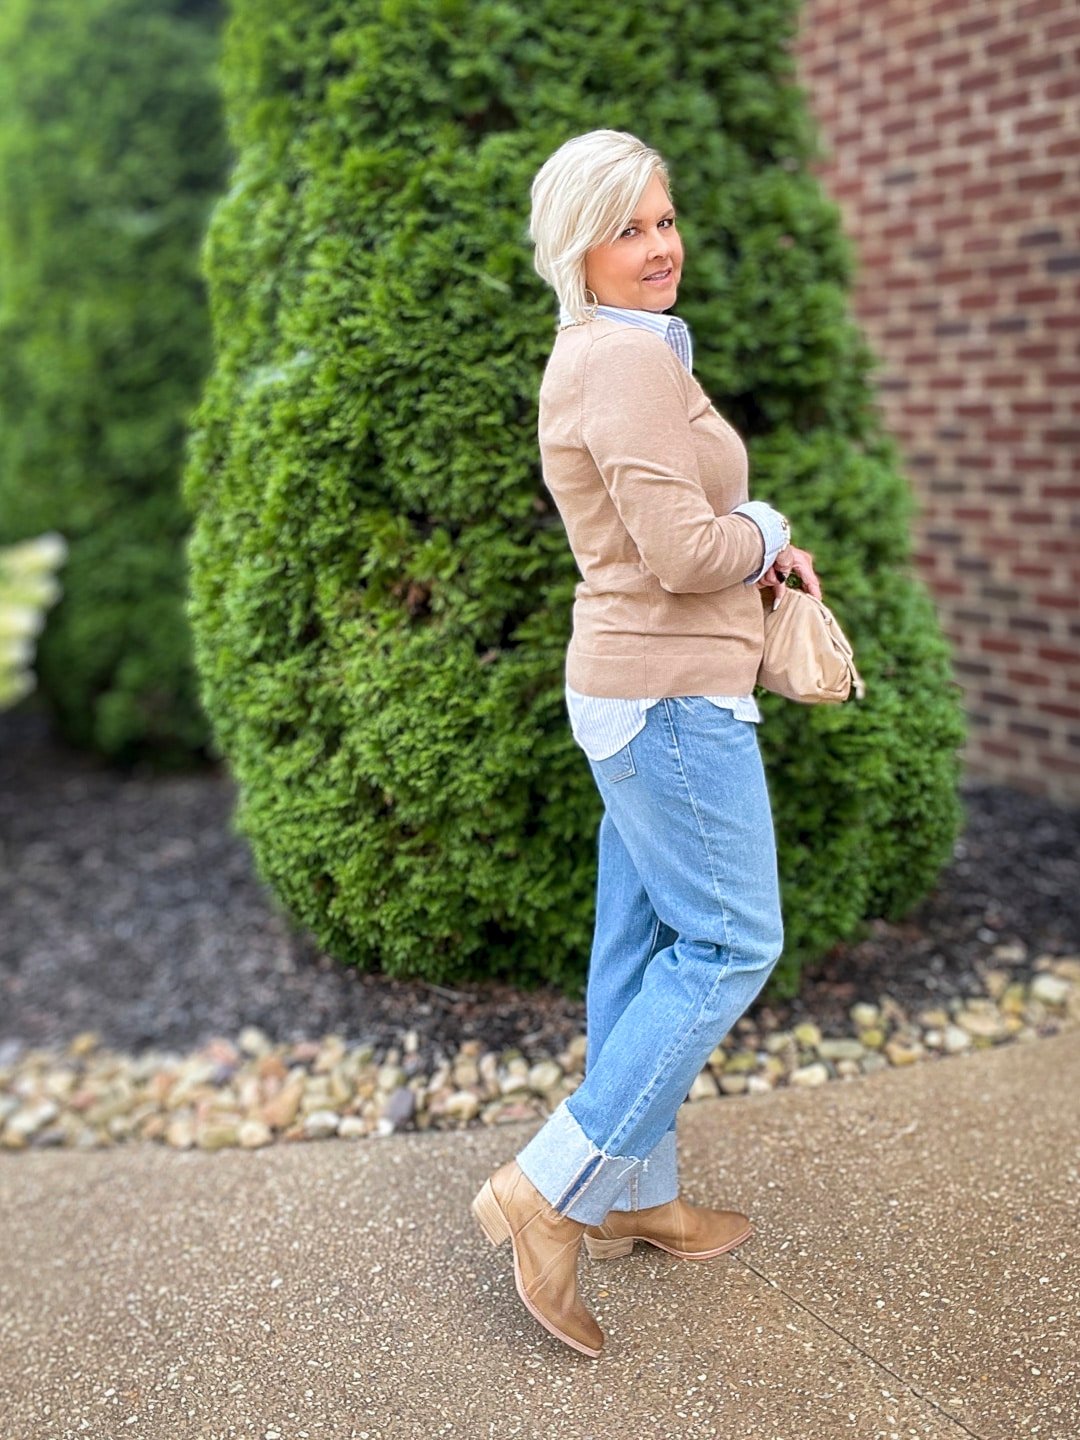 Over 40 Fashion Blogger, Tania Stephens is wearing big cuff jeans from Banana Republic 8